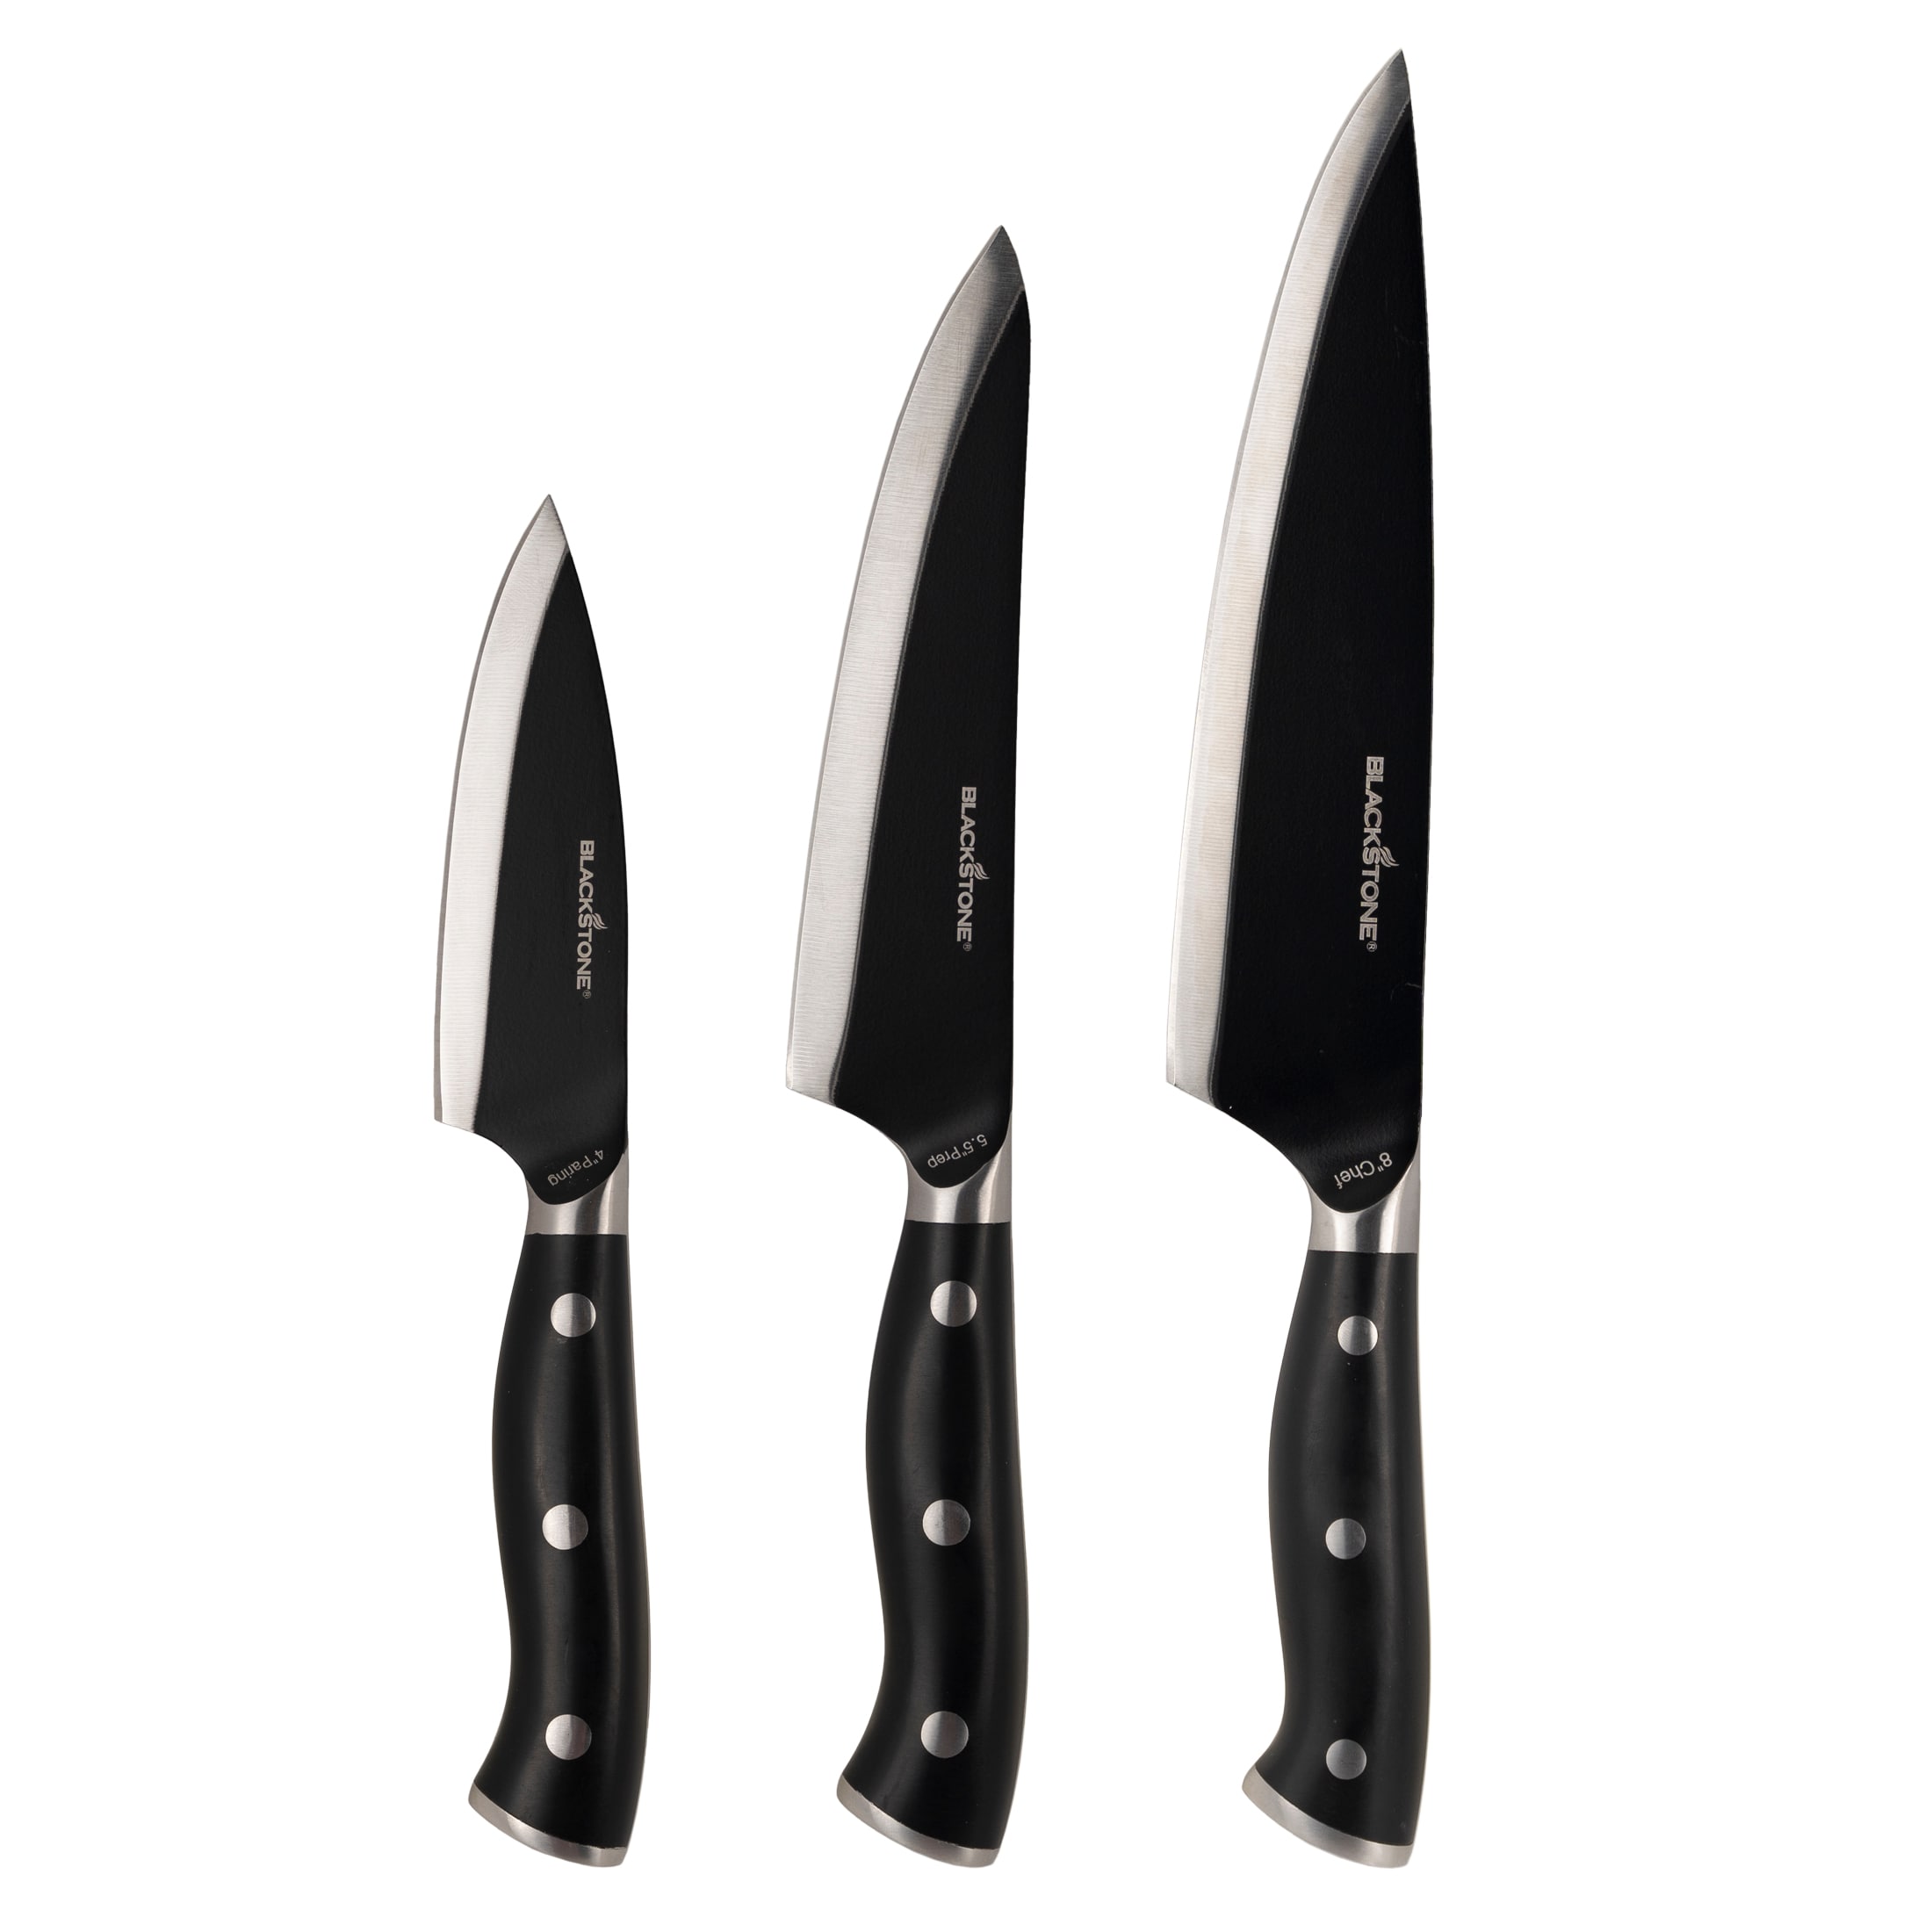 Blackstone Signature Series 7 Stainless Steel Chef's Knife - 5473 -  Outdoor Home Store